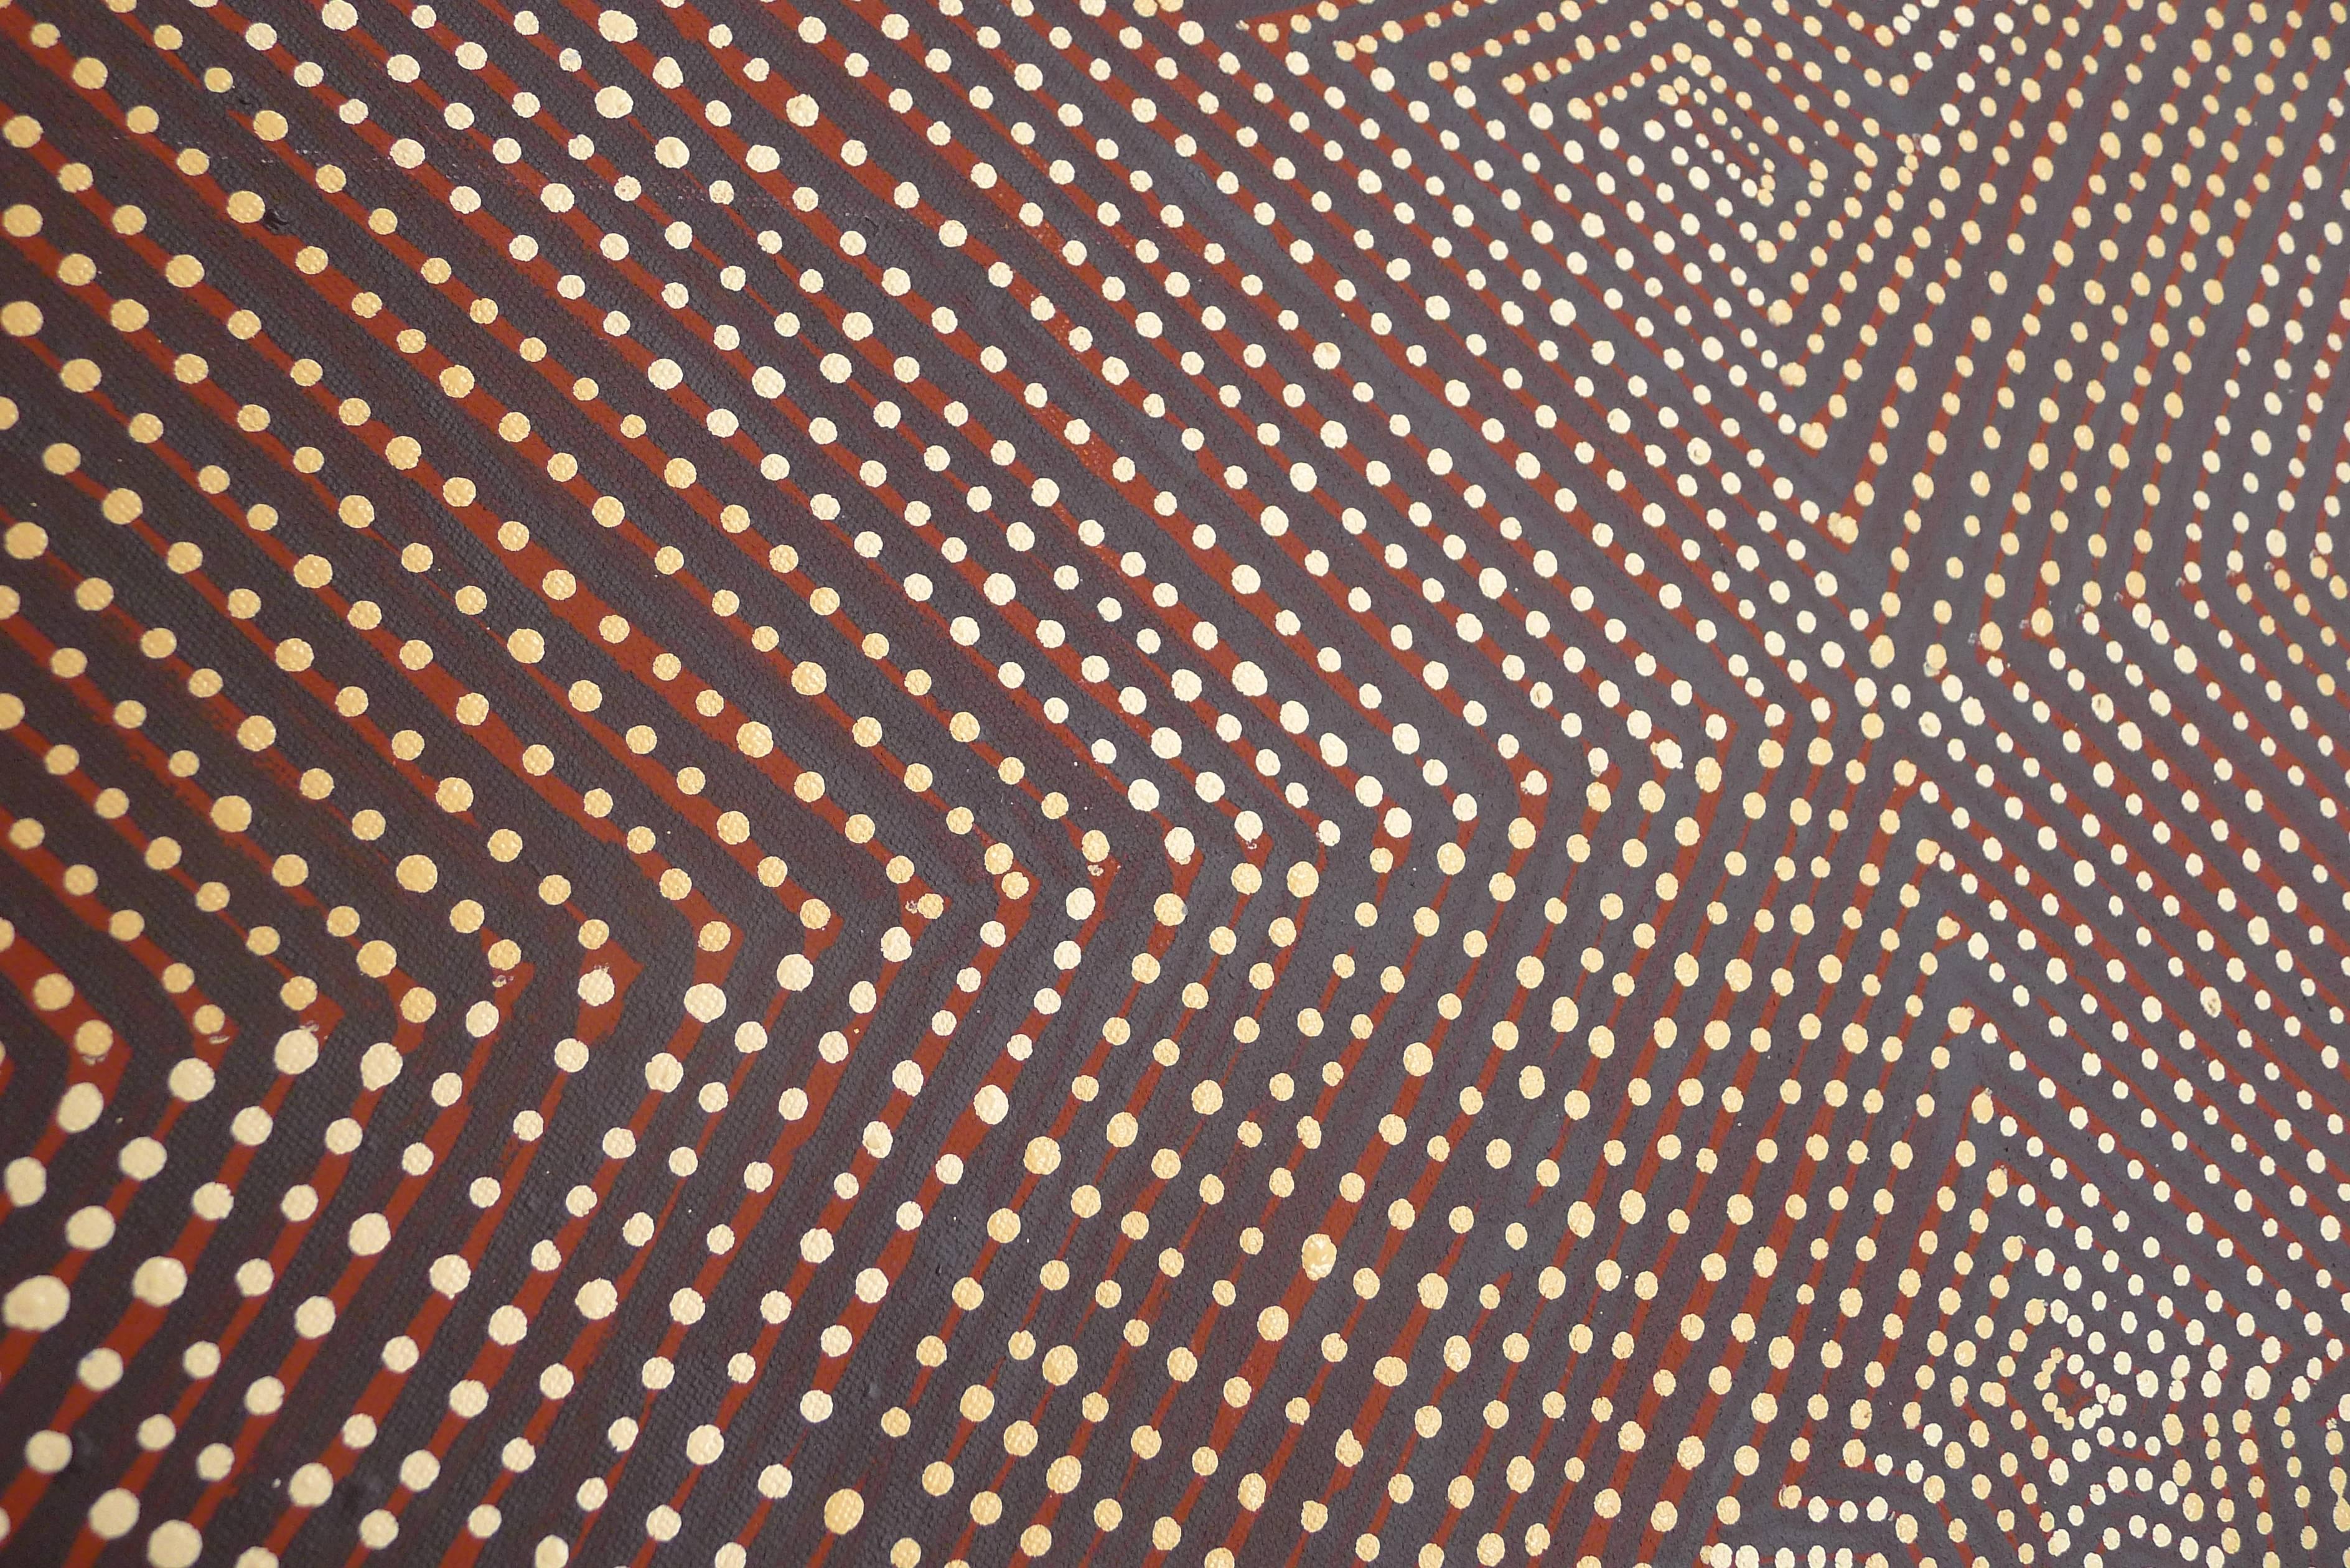 This mesmerizing acrylic on canvas by aboriginal Australian artist Maureen Poulson Napangardi creates an undulating visual pattern through fine dotting. A simple composition on first viewing reveals interesting use of different colors and tones to